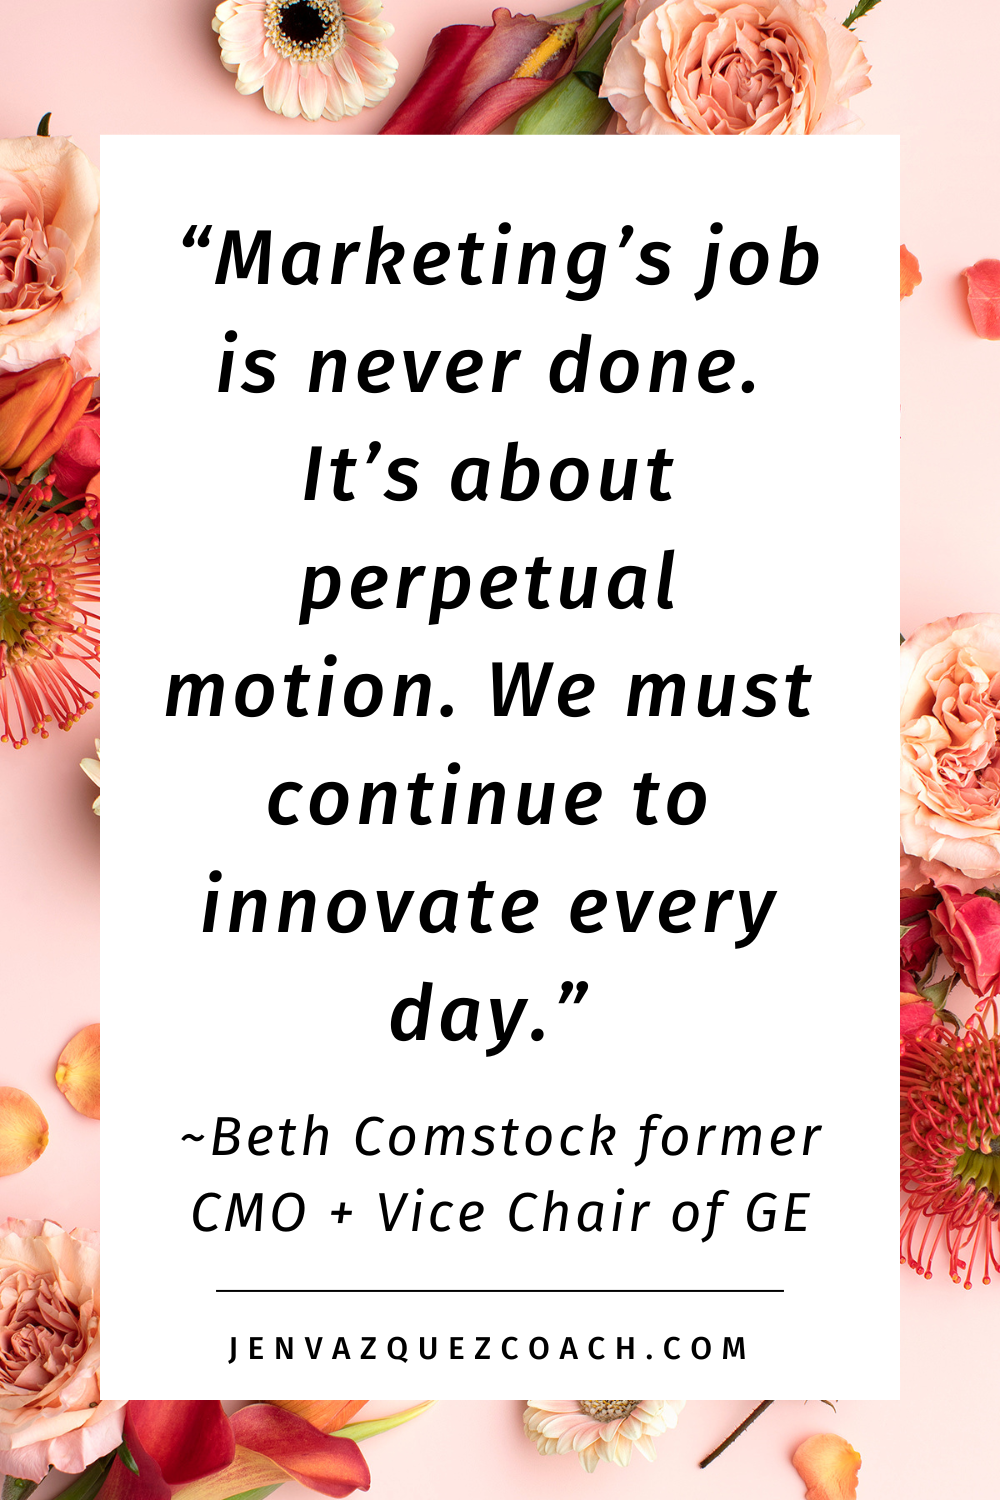 _“Marketing’s job is never done. It’s about perpetual motion. We must continue to innovate every day.” quote by ~Beth Comstock former CMO + Vice Chair of GE - Jen Vazquez Media